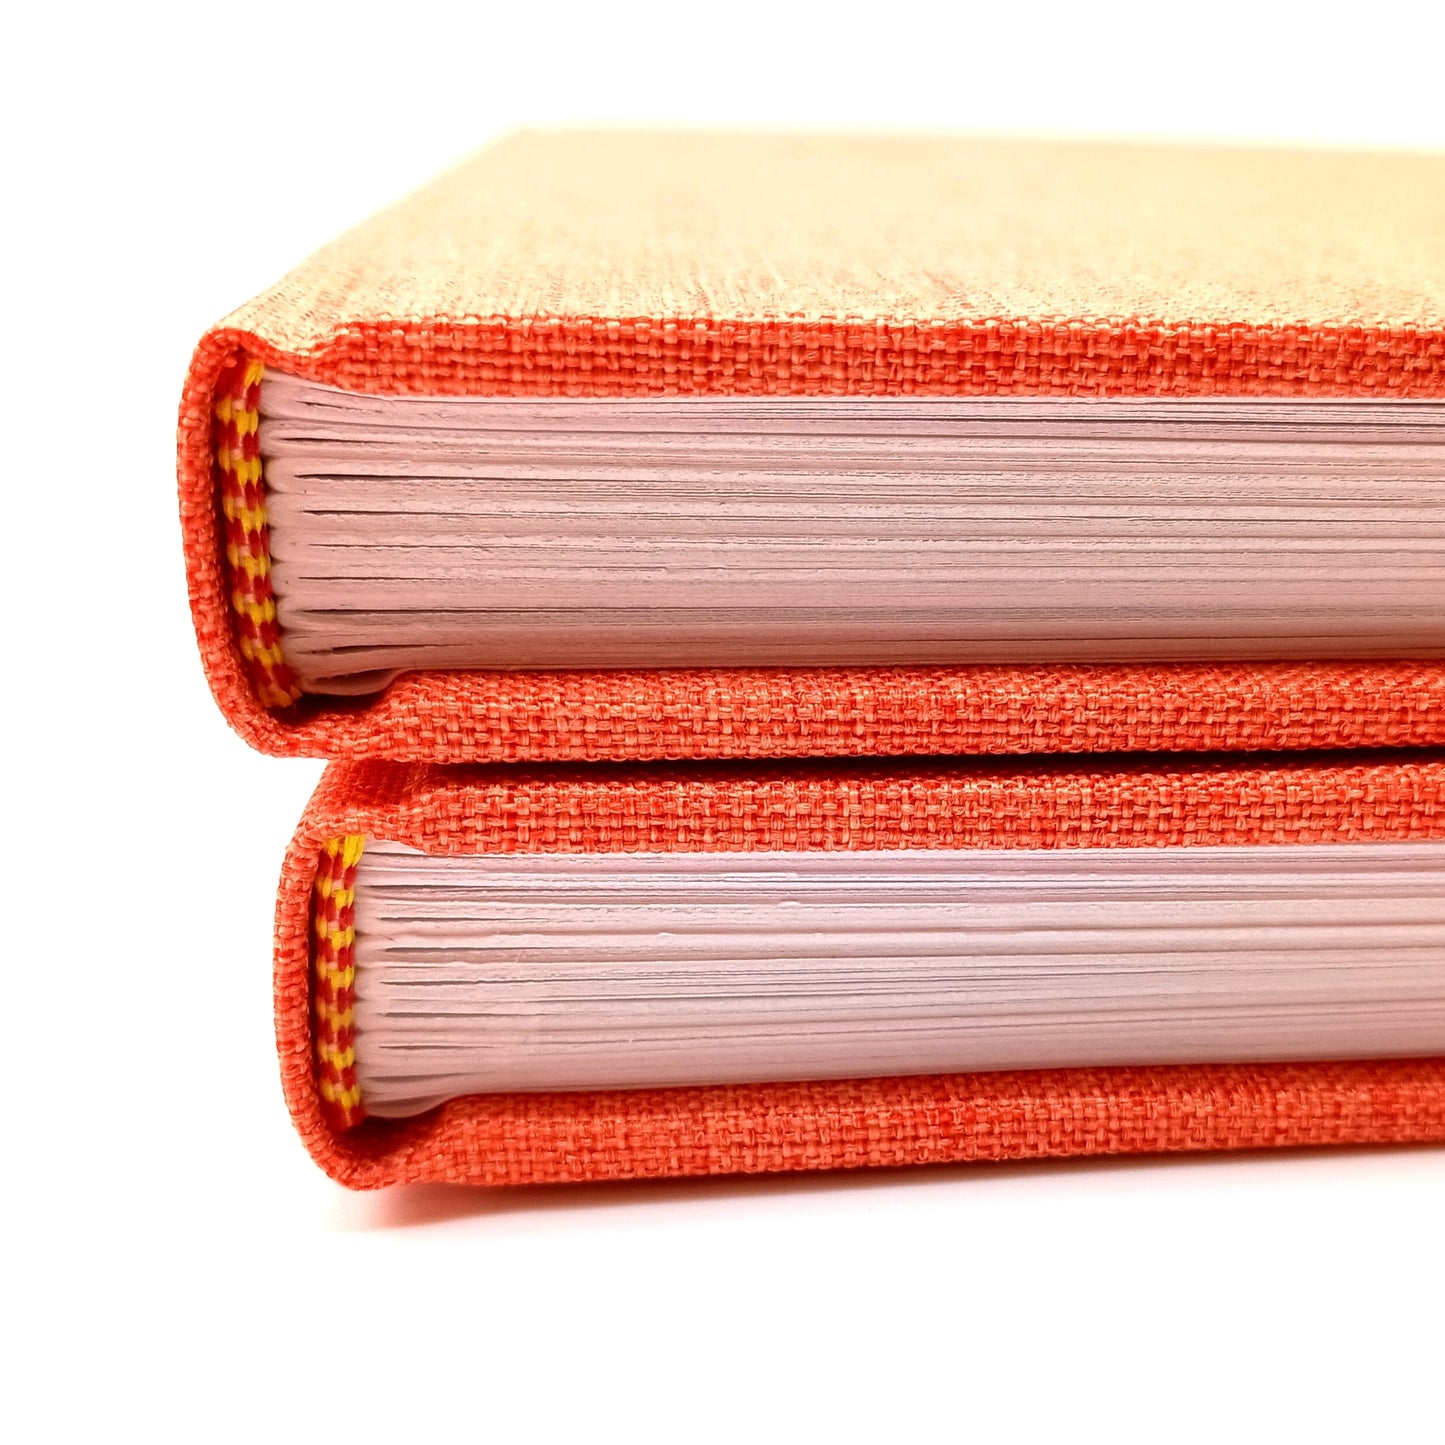 Large Full Cloth Journals